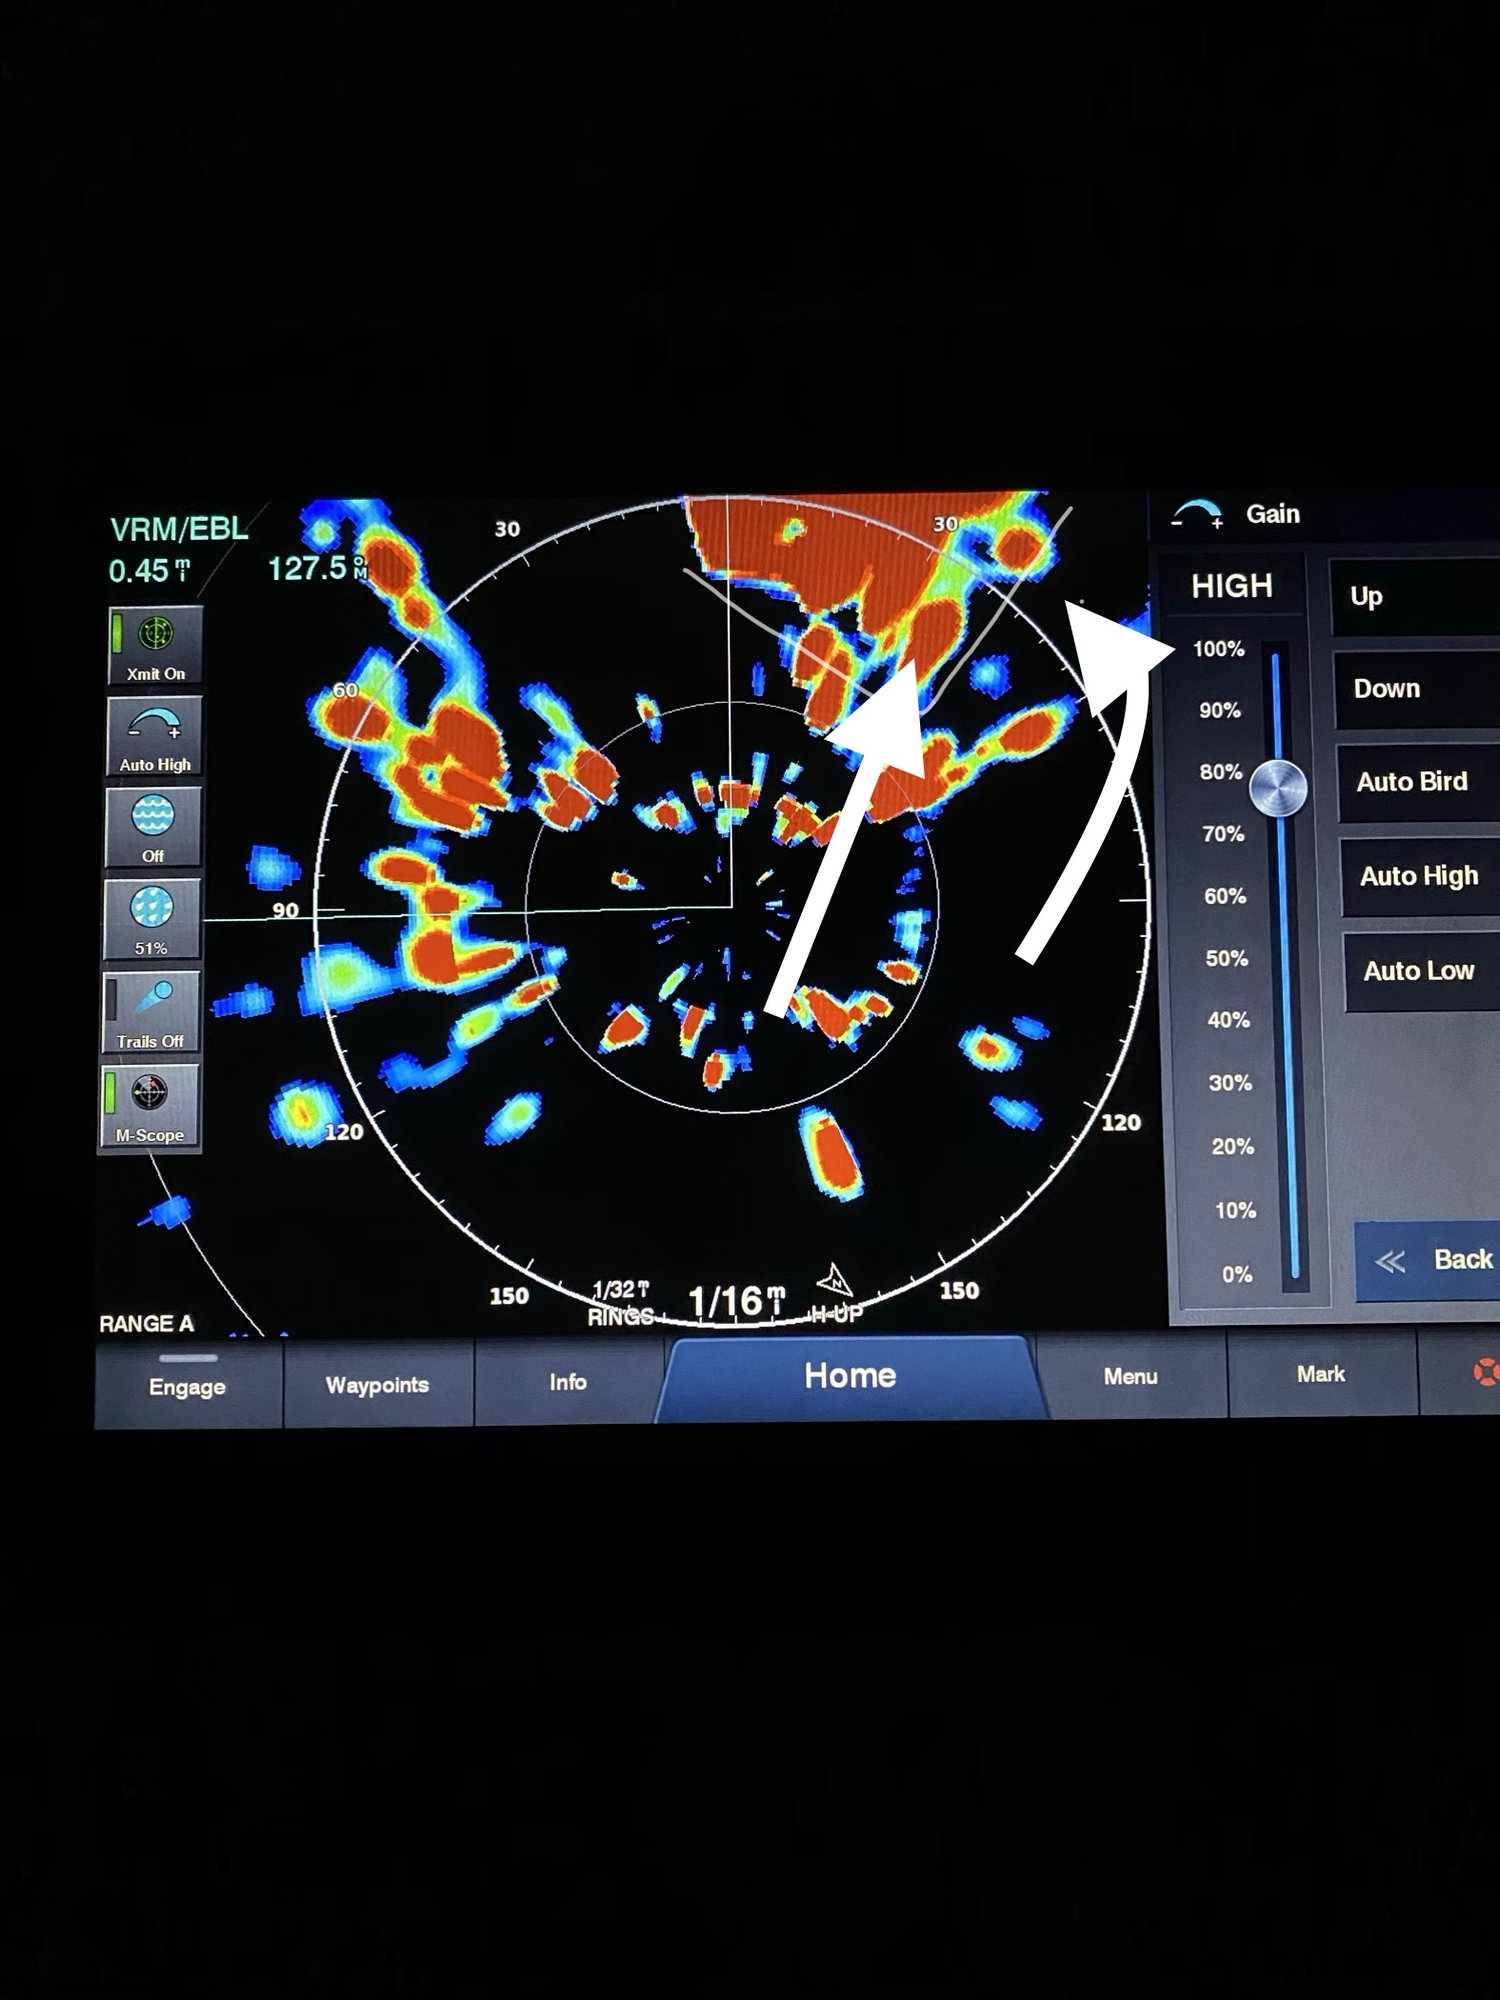 Garmin Fantom radar; Is this a normal image? - Page 2 - The Hull Truth -  Boating and Fishing Forum